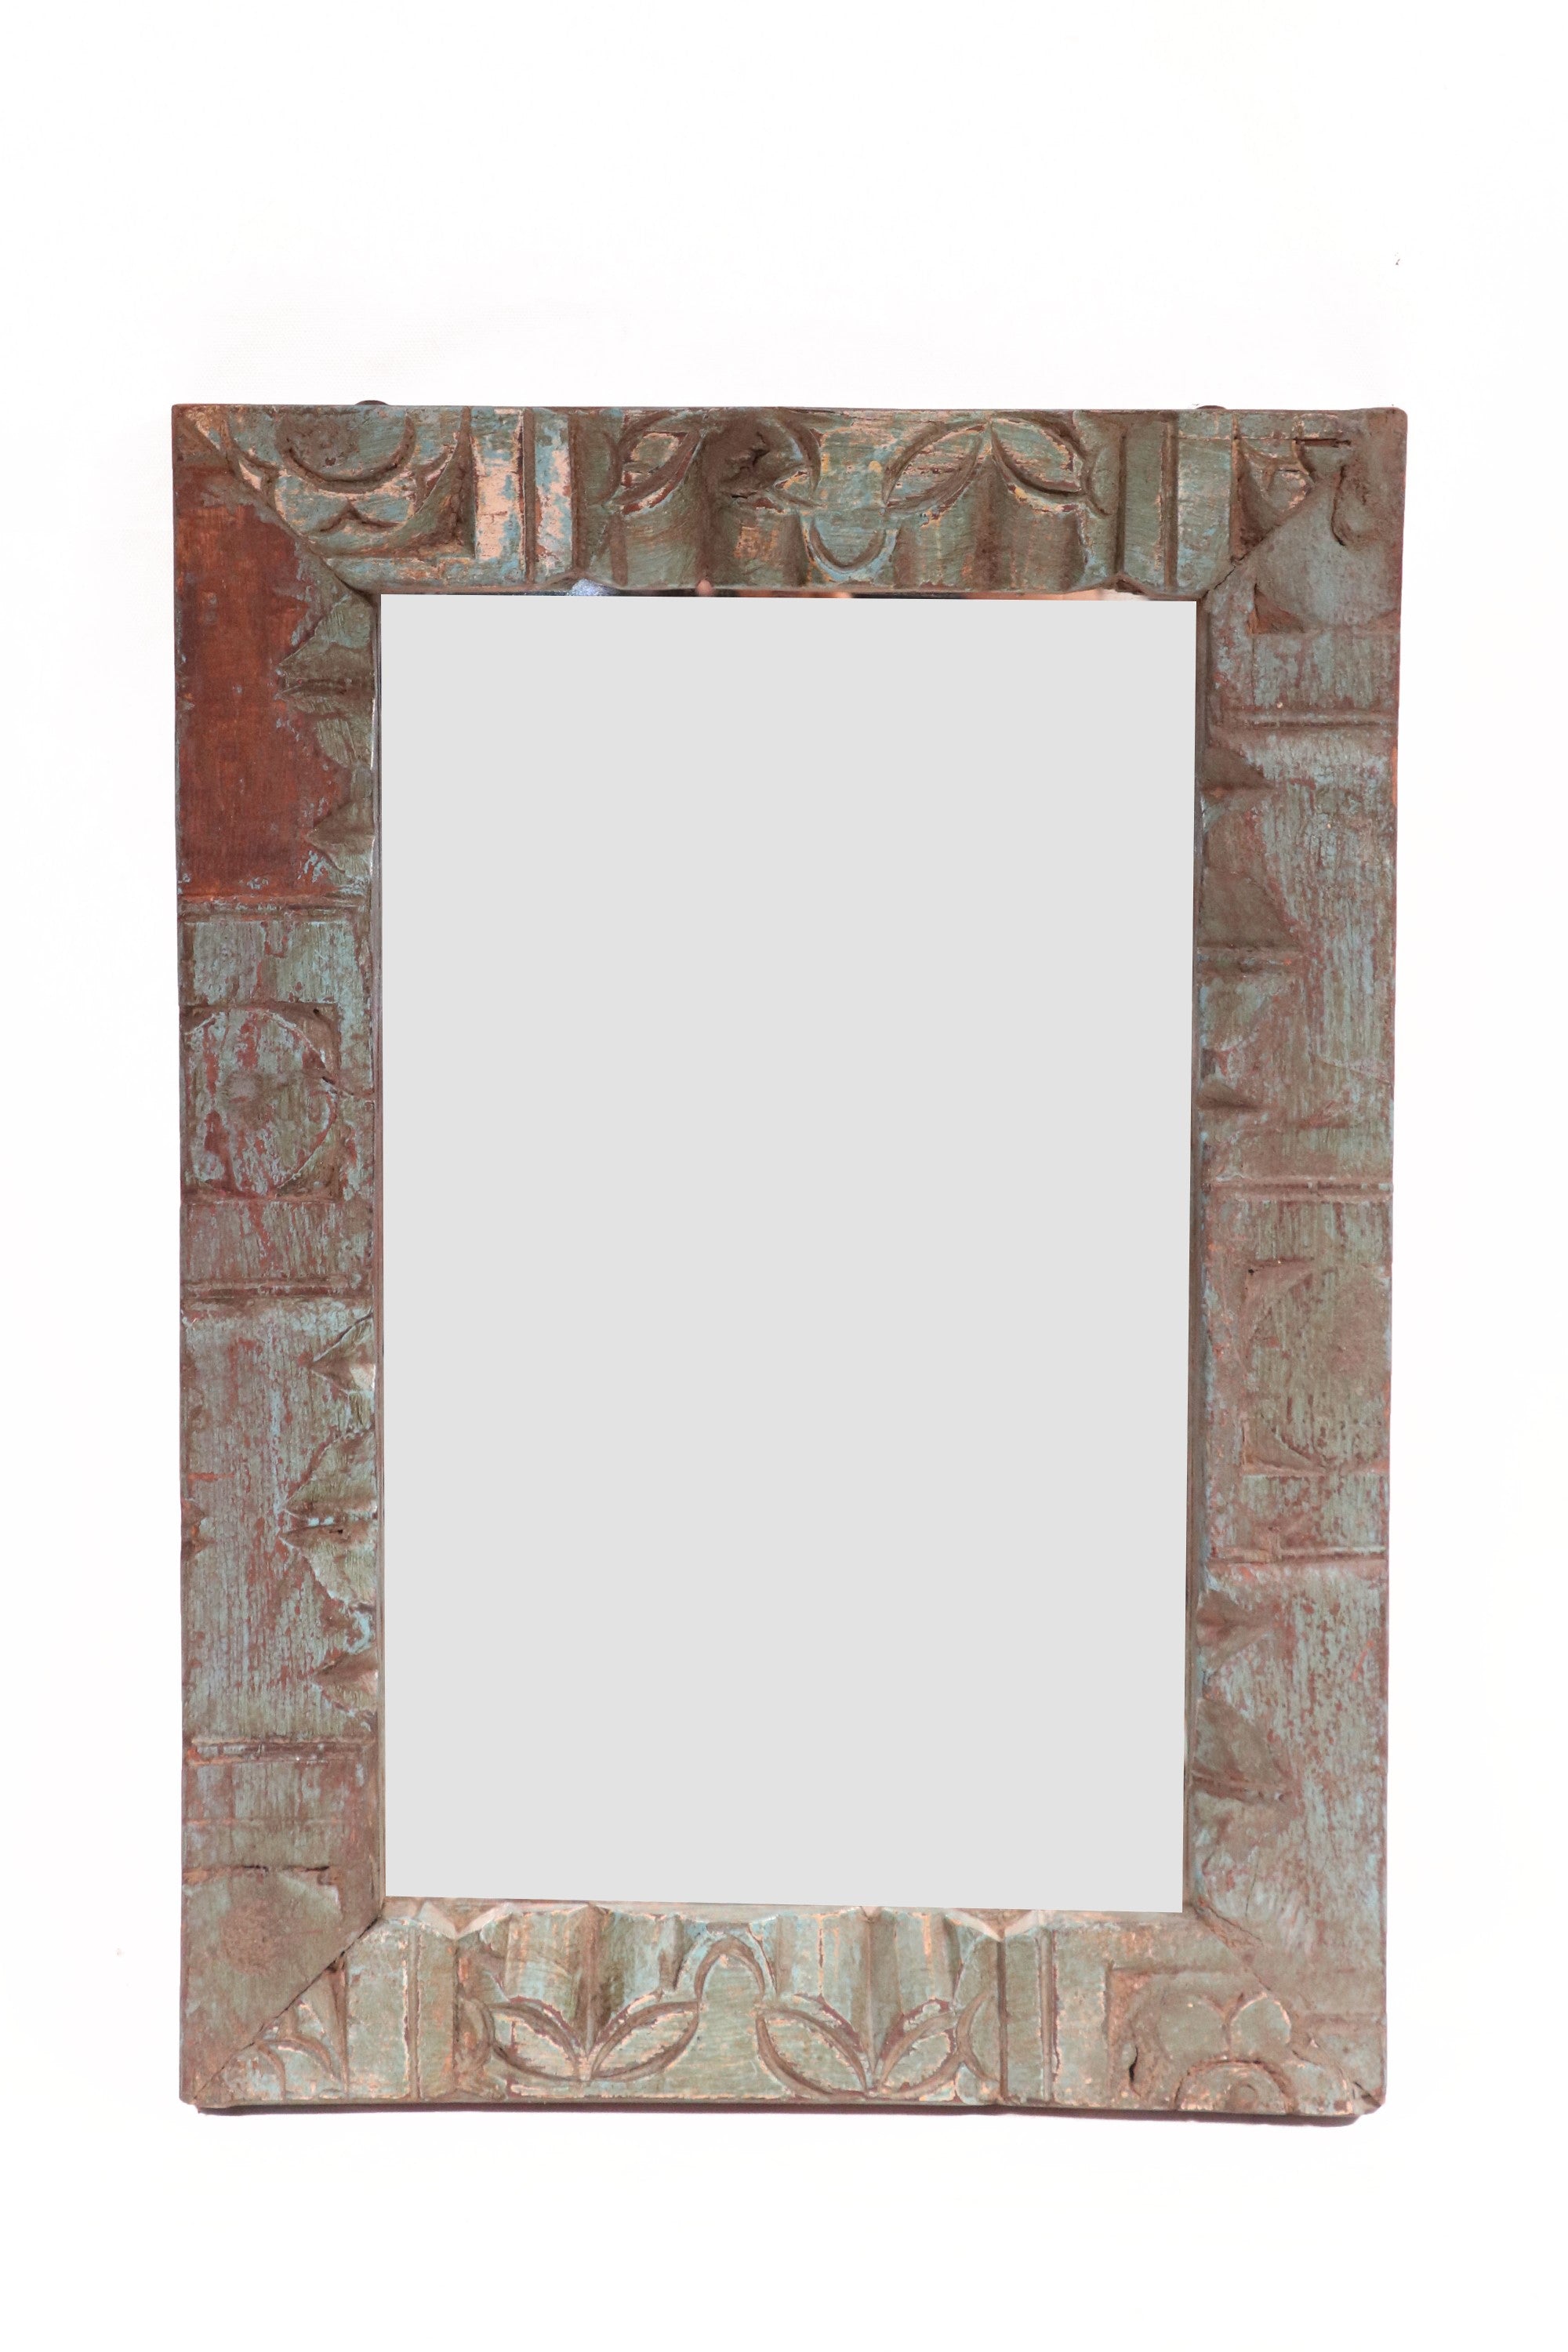 Thick carved wooden frame with mirror Mirror